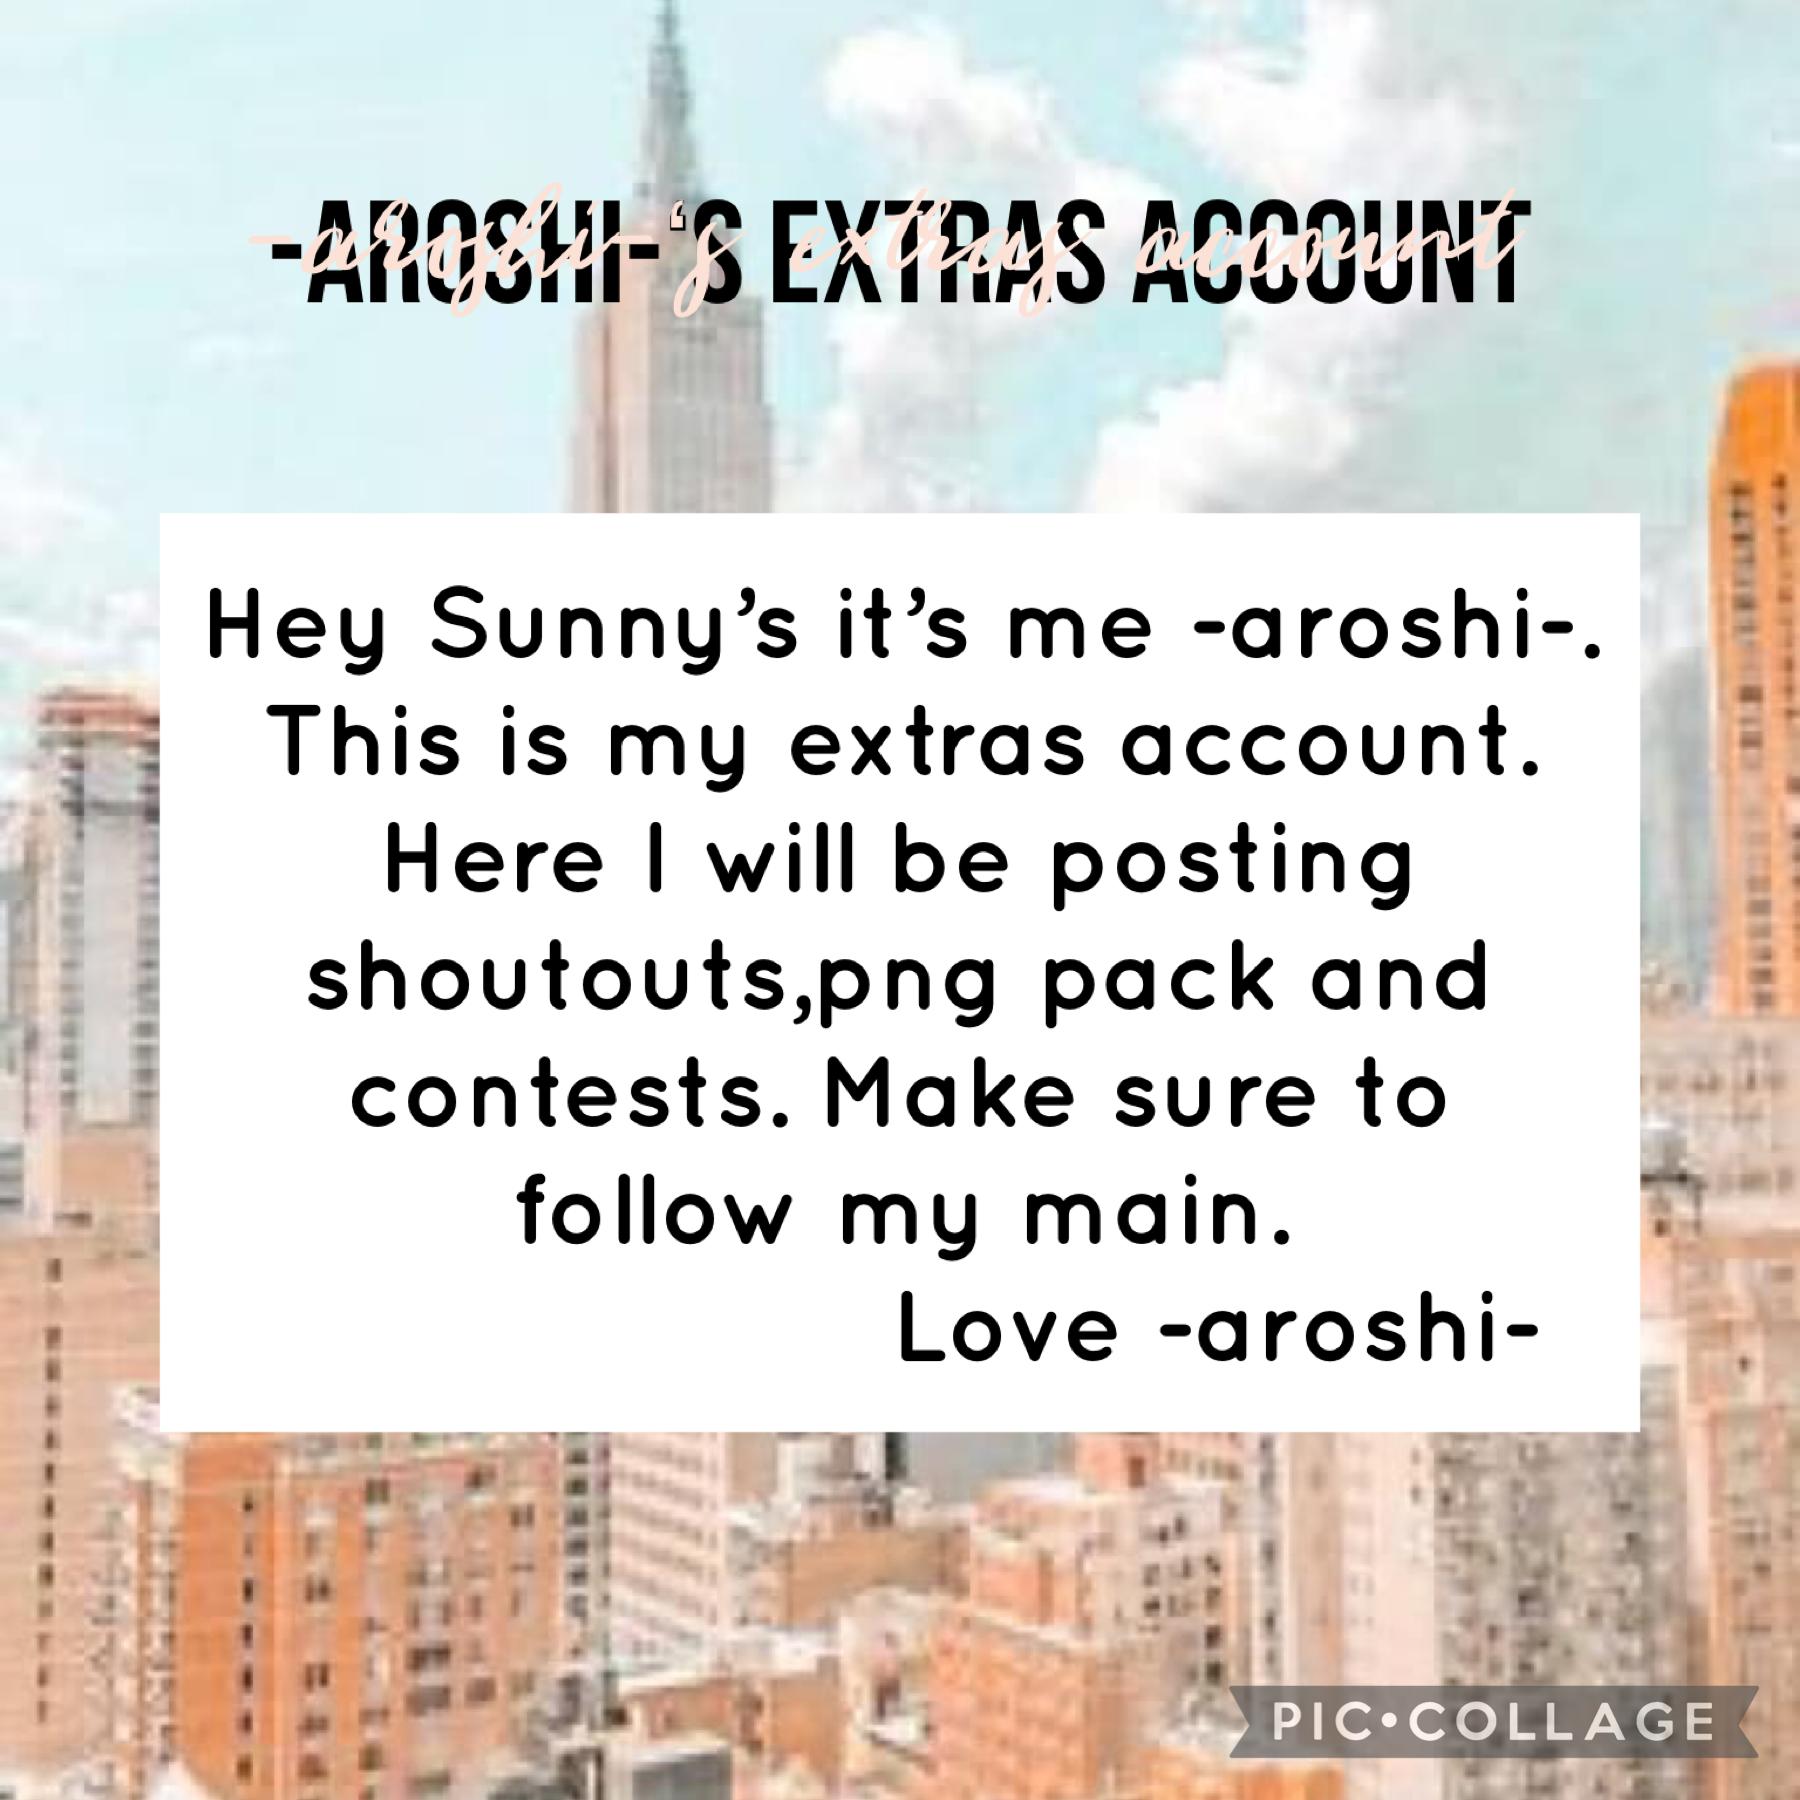 Hey Sunny’s, it’s me -aroshi- and this is my extras account. Please read the following